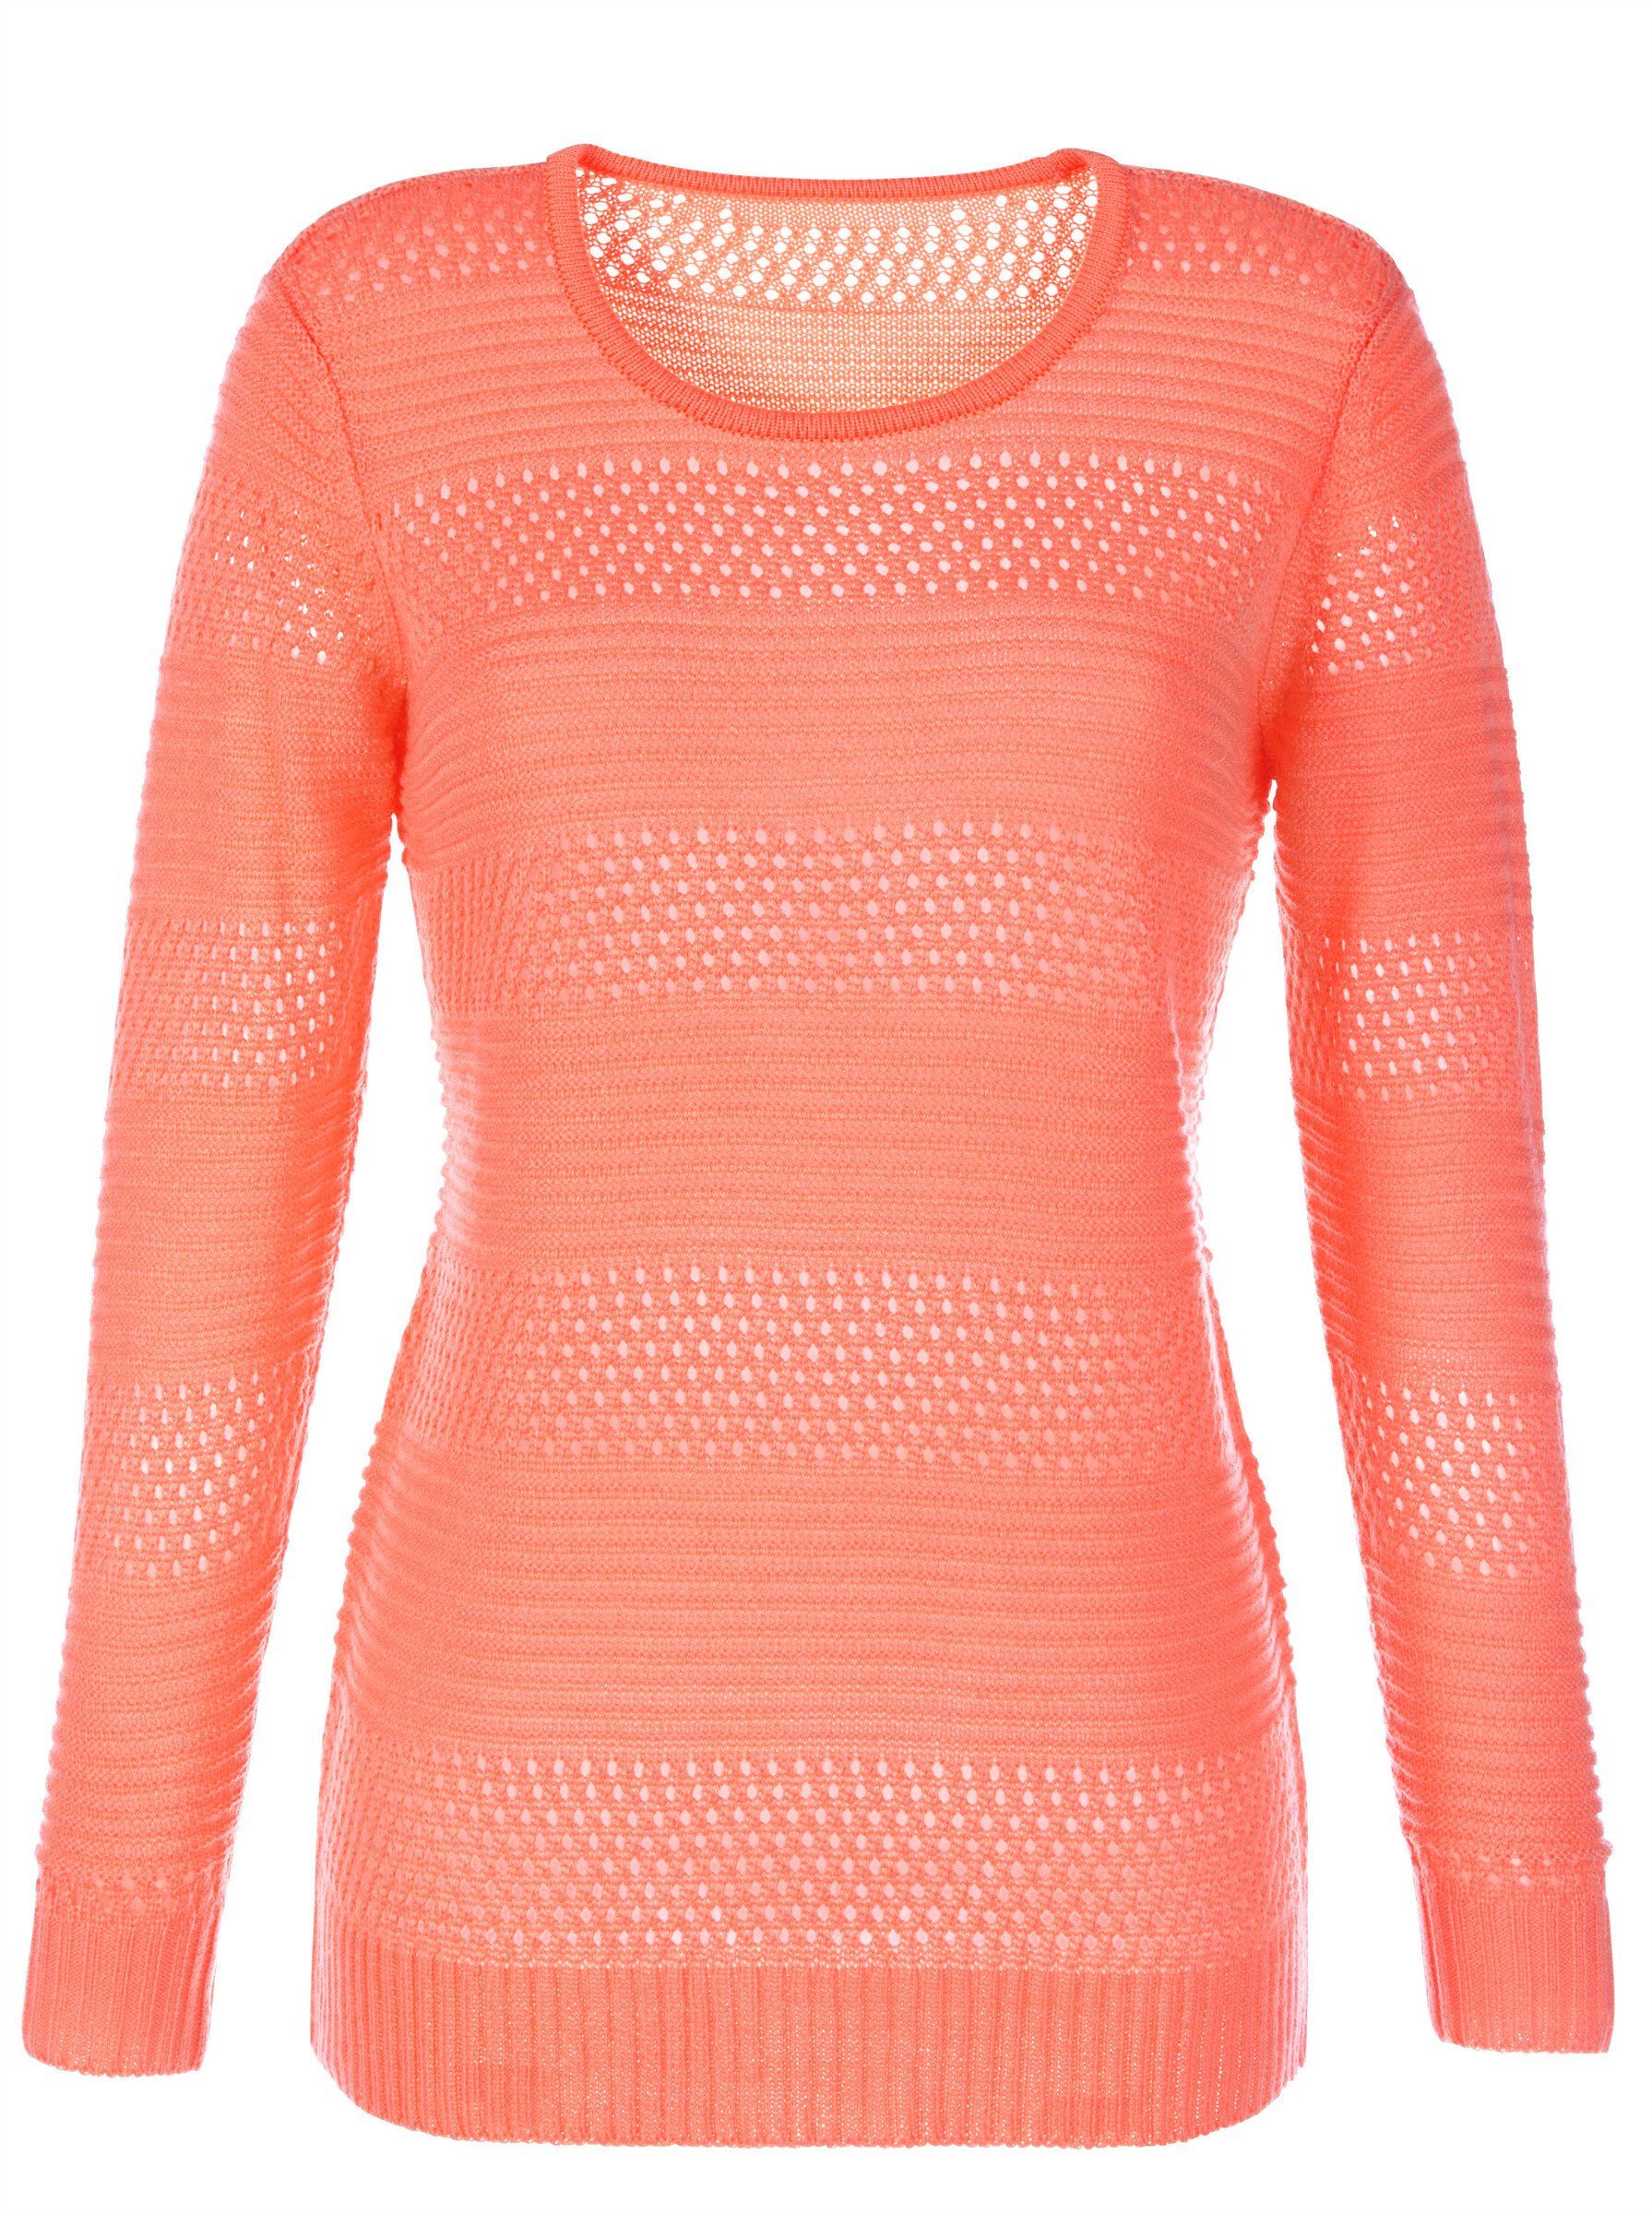 apricot Strickpullover Sieh an!